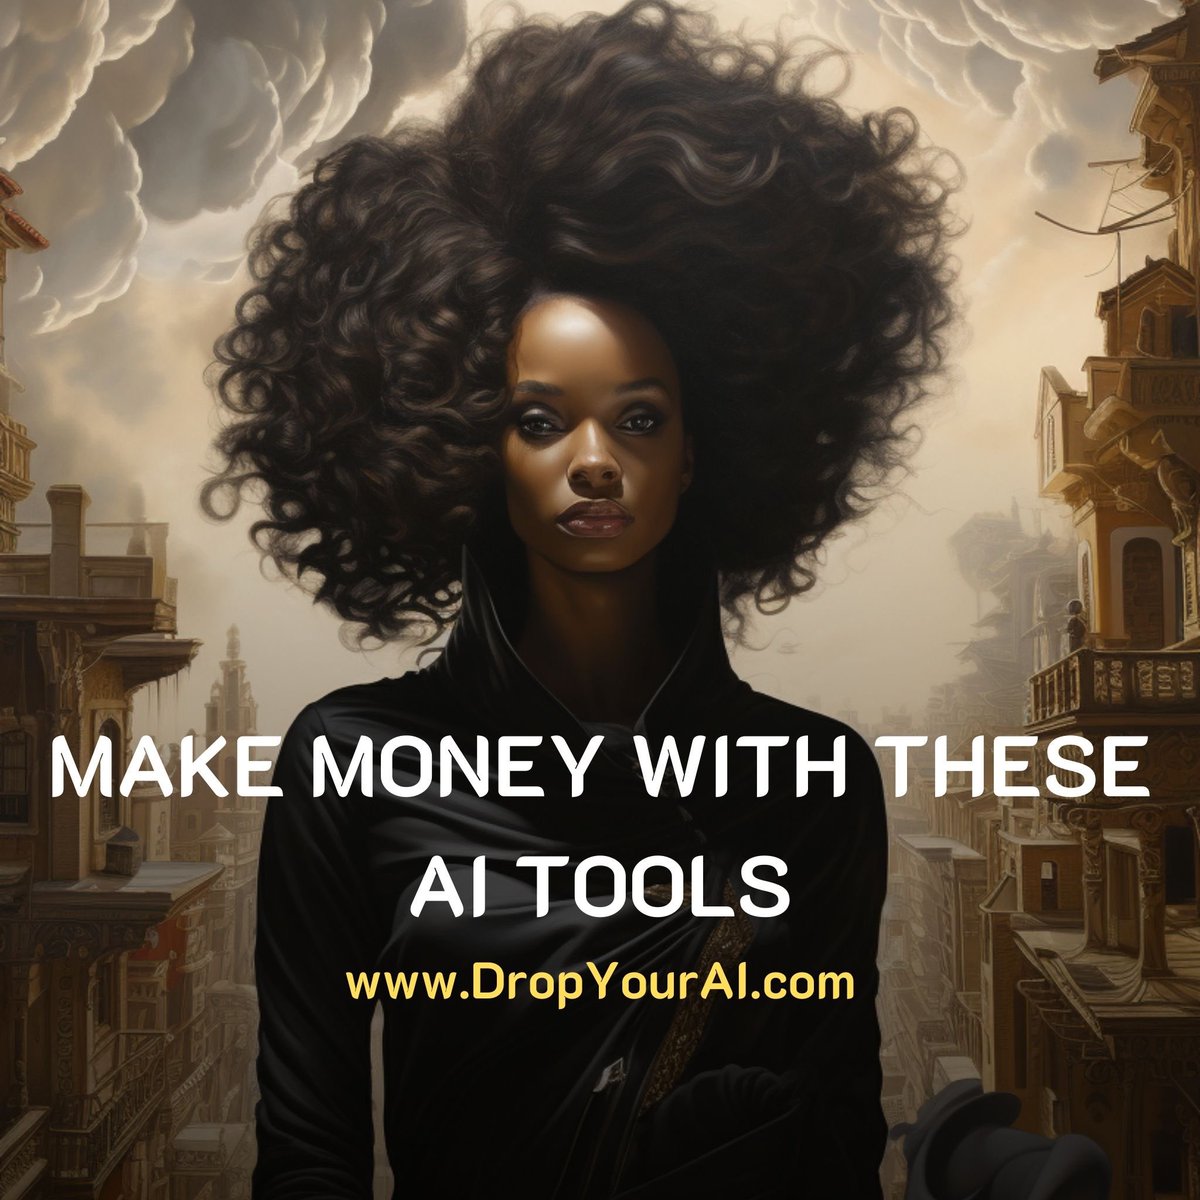 30 AI tools that will help you make MONEY with your online business: 👇

1. Best AI Tools for Coding:

- Figstack
- aiXcoder
- TabNine
- GitHub Copilot

2. Writing and Content Creation:

- Rytr
- Jasper
- ClickUp
- Copy AI
- Writesonic
- GrammarlyGO

3. Best AI Tools for…